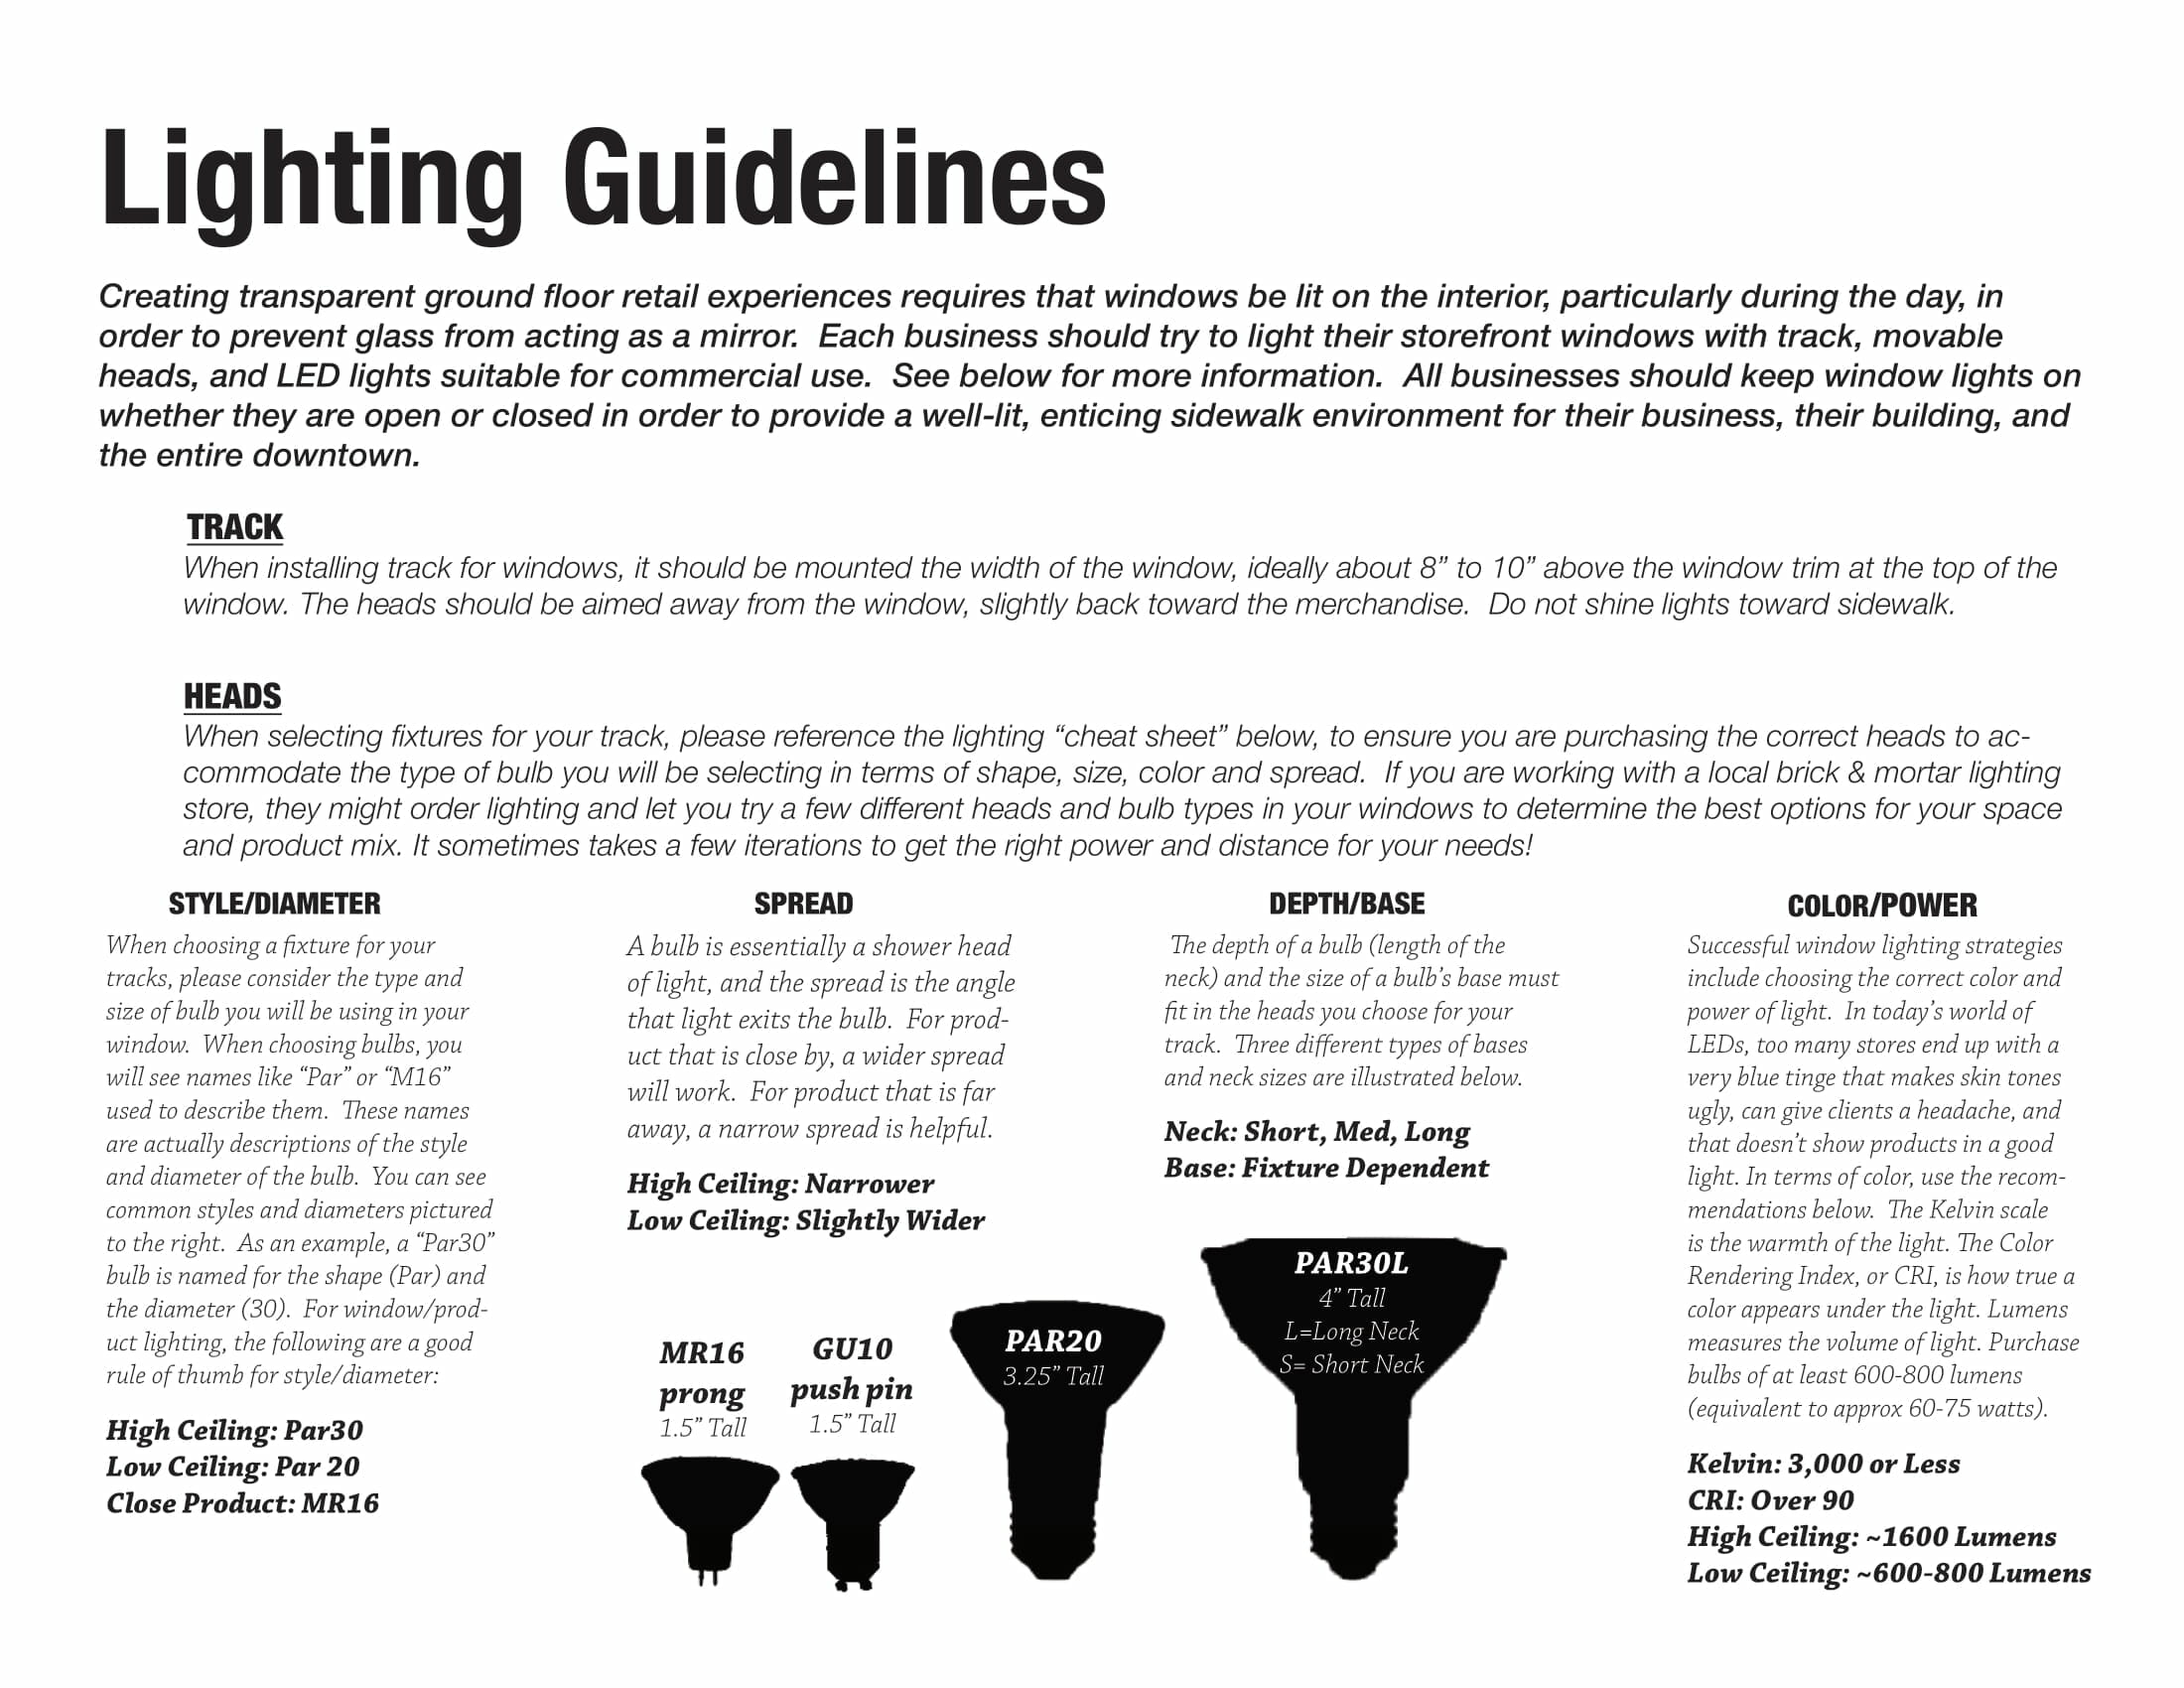 Lighting Cheat Sheet One Pager V 11-16-21-1